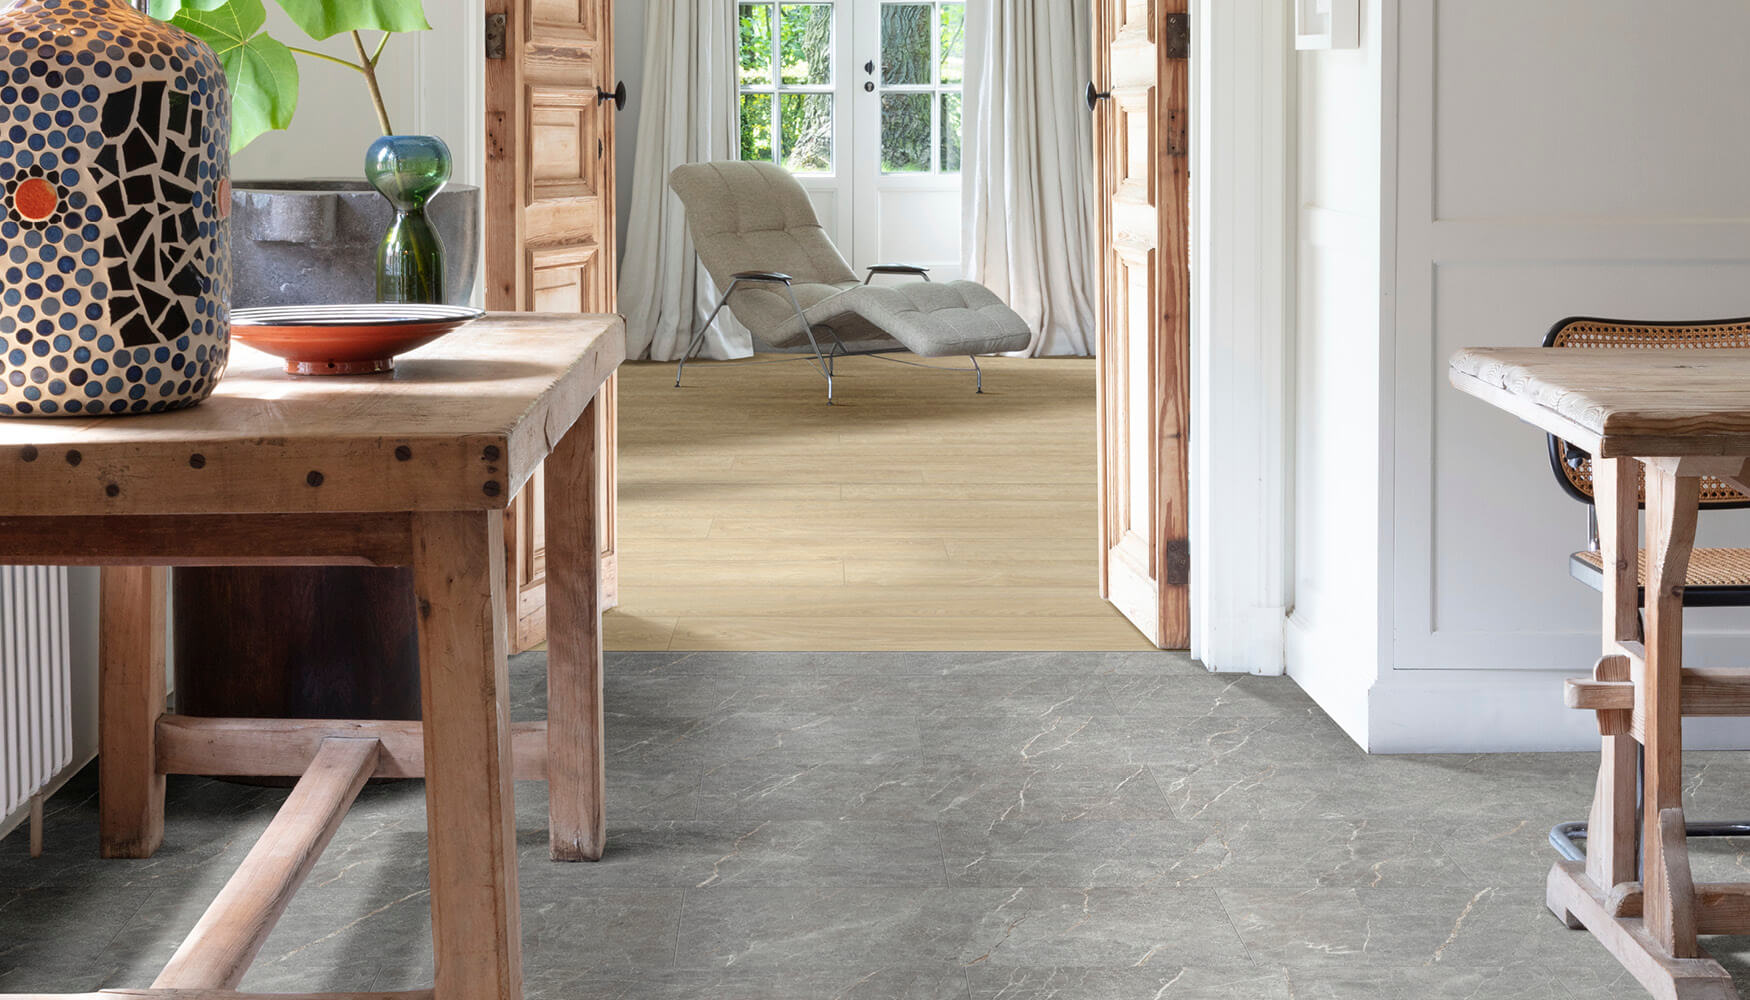 Stone effect LVT flooring in one room and wood effect LVT flooring in the next room. Seamless transition.